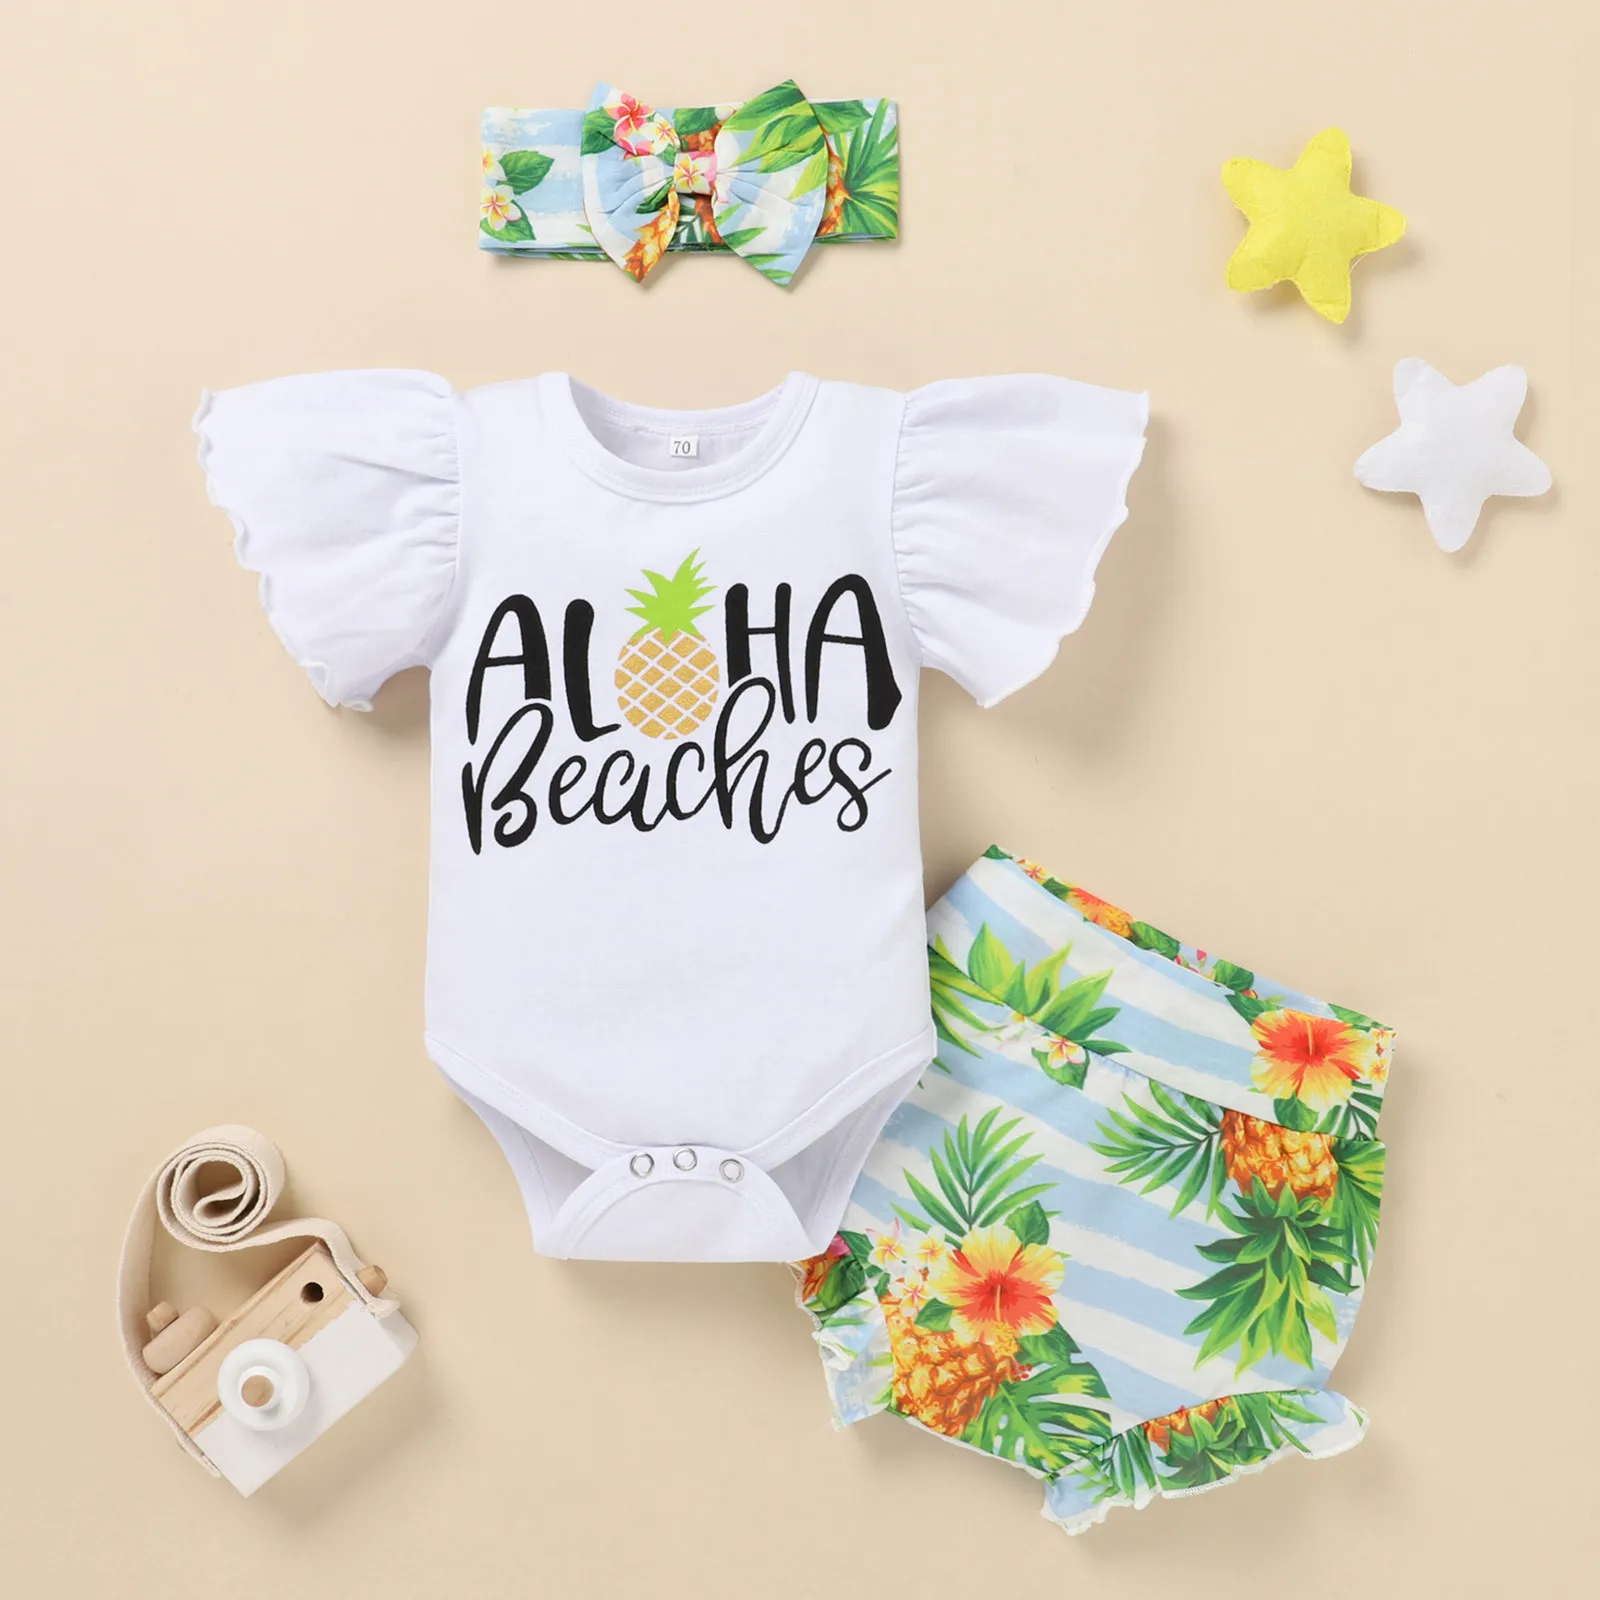 

0-24 Months Newborn Baby Girls Clothes Sets Pineapple Letter Print Summer Fly Sleeve Romper Top+Ruffle Shorts+Headband Sets